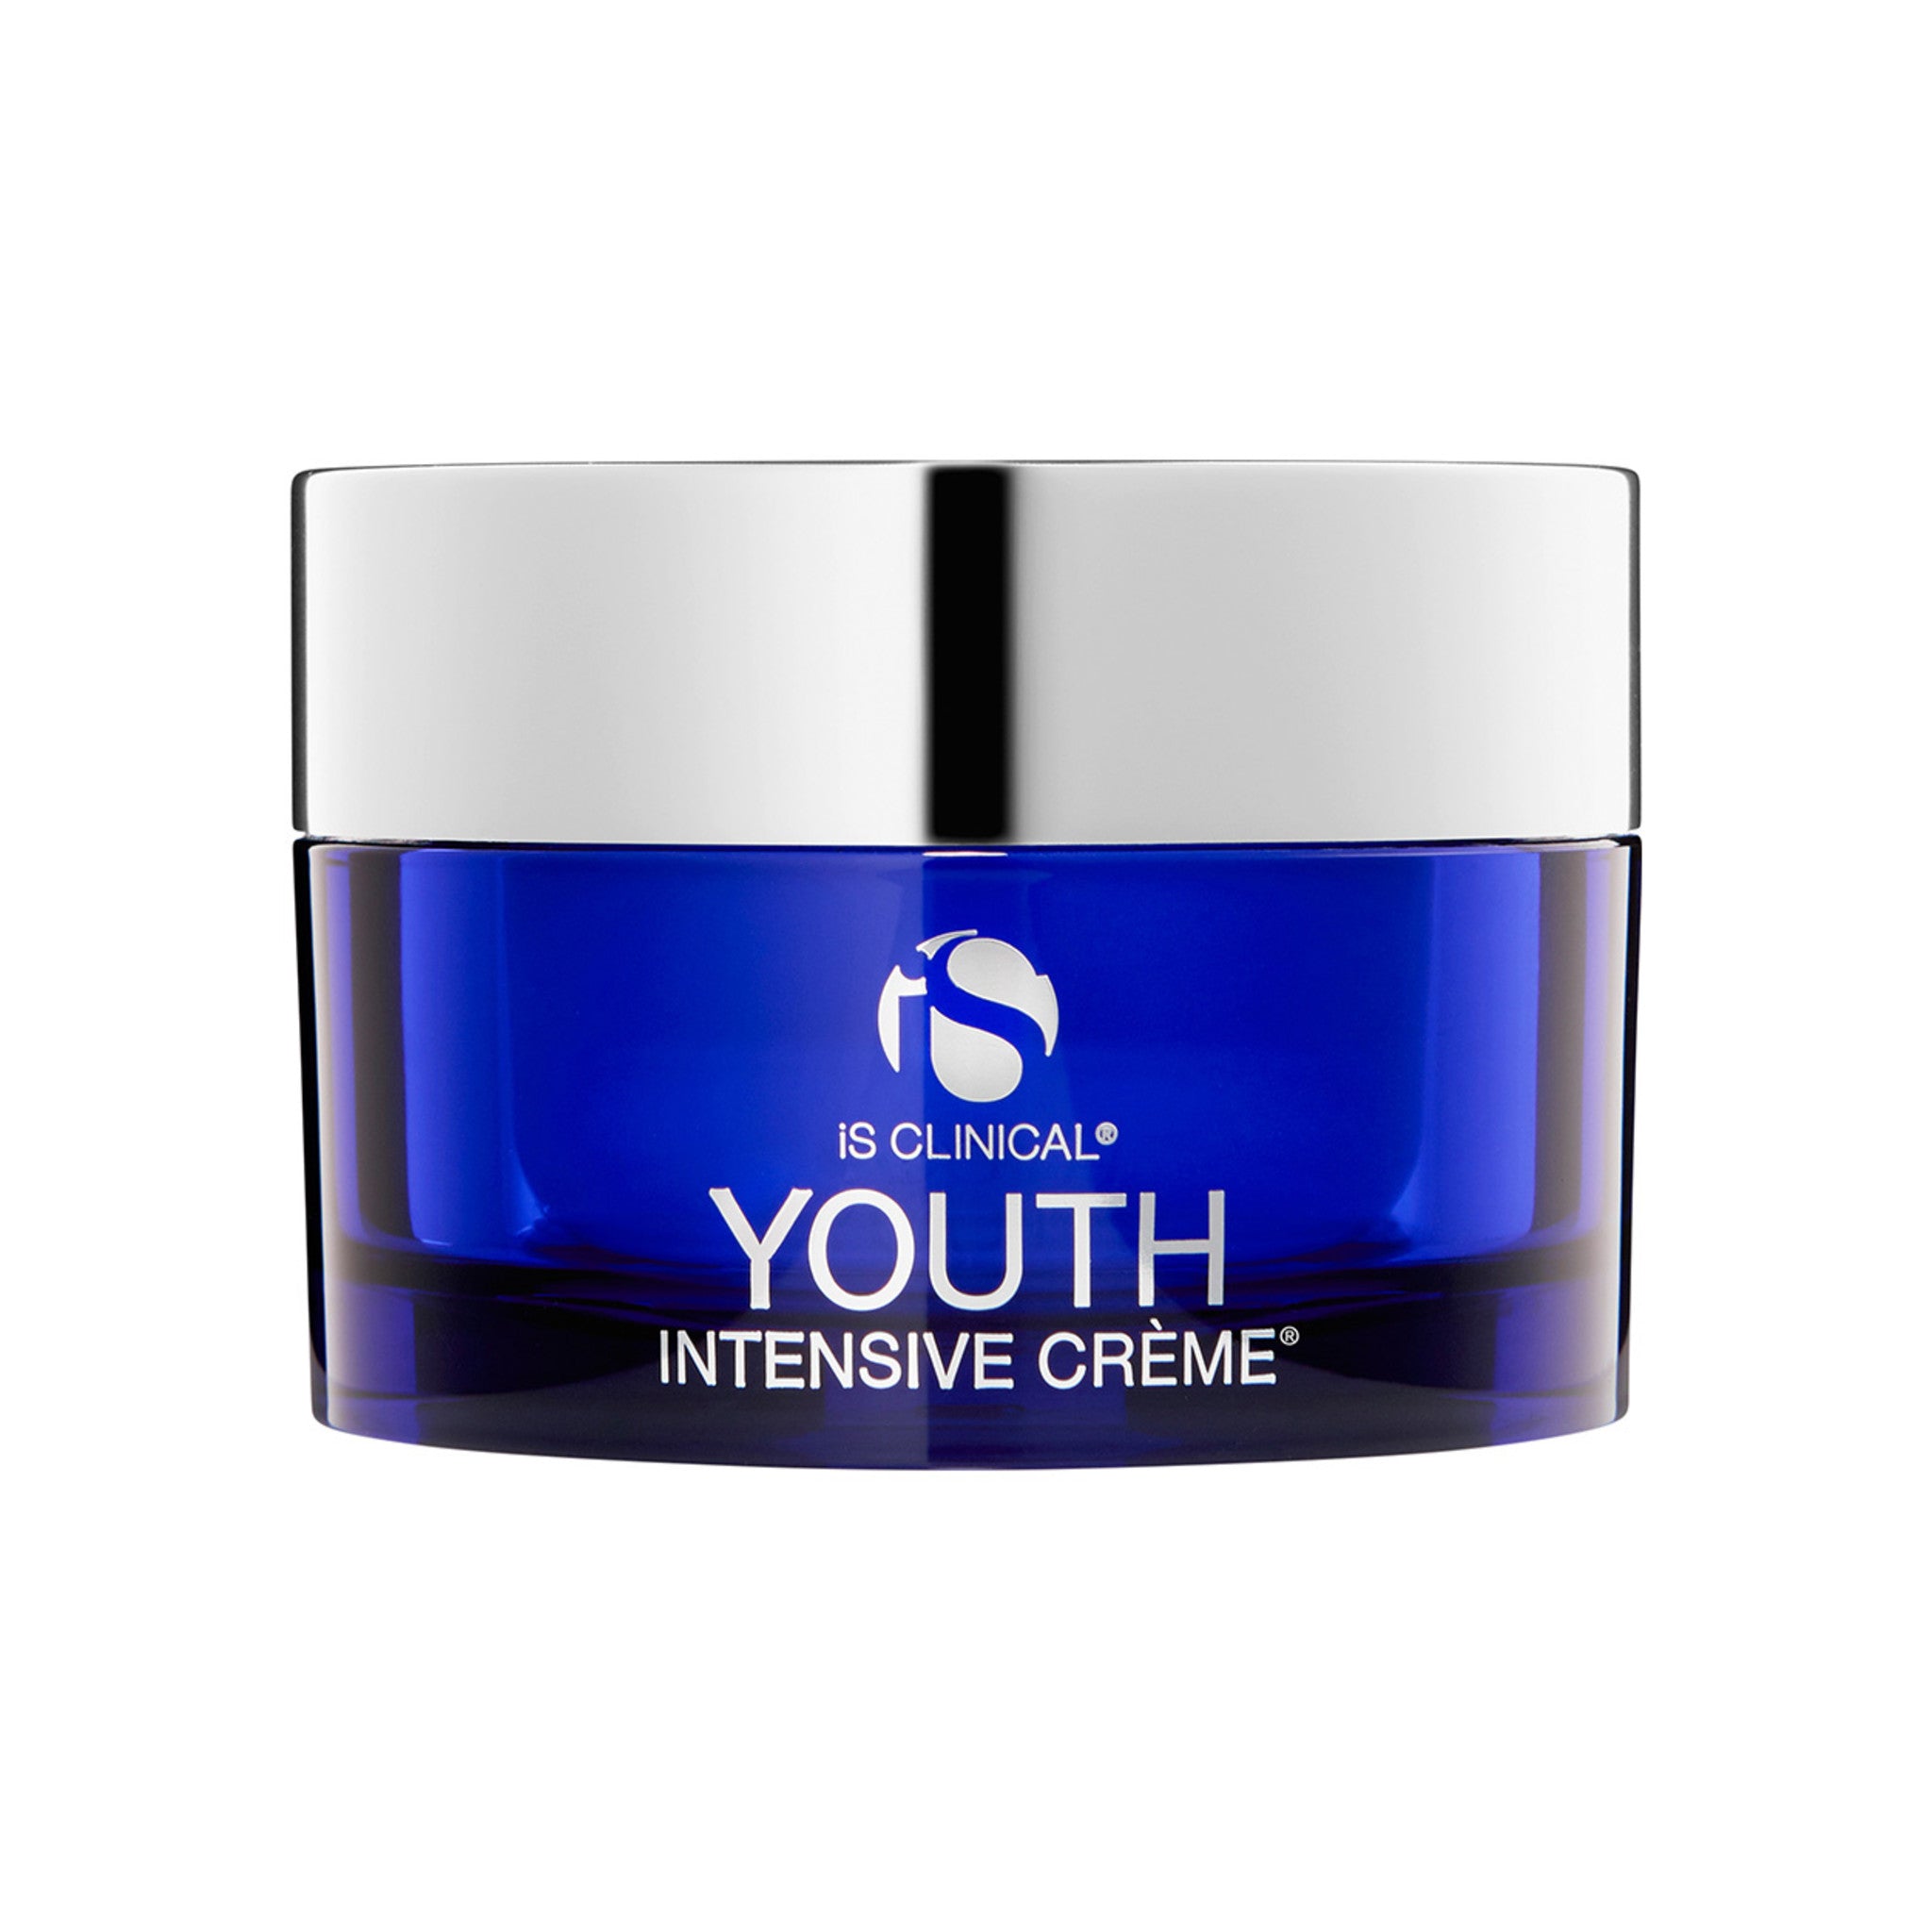 IS Clinical Youth Intensive Crème main image.